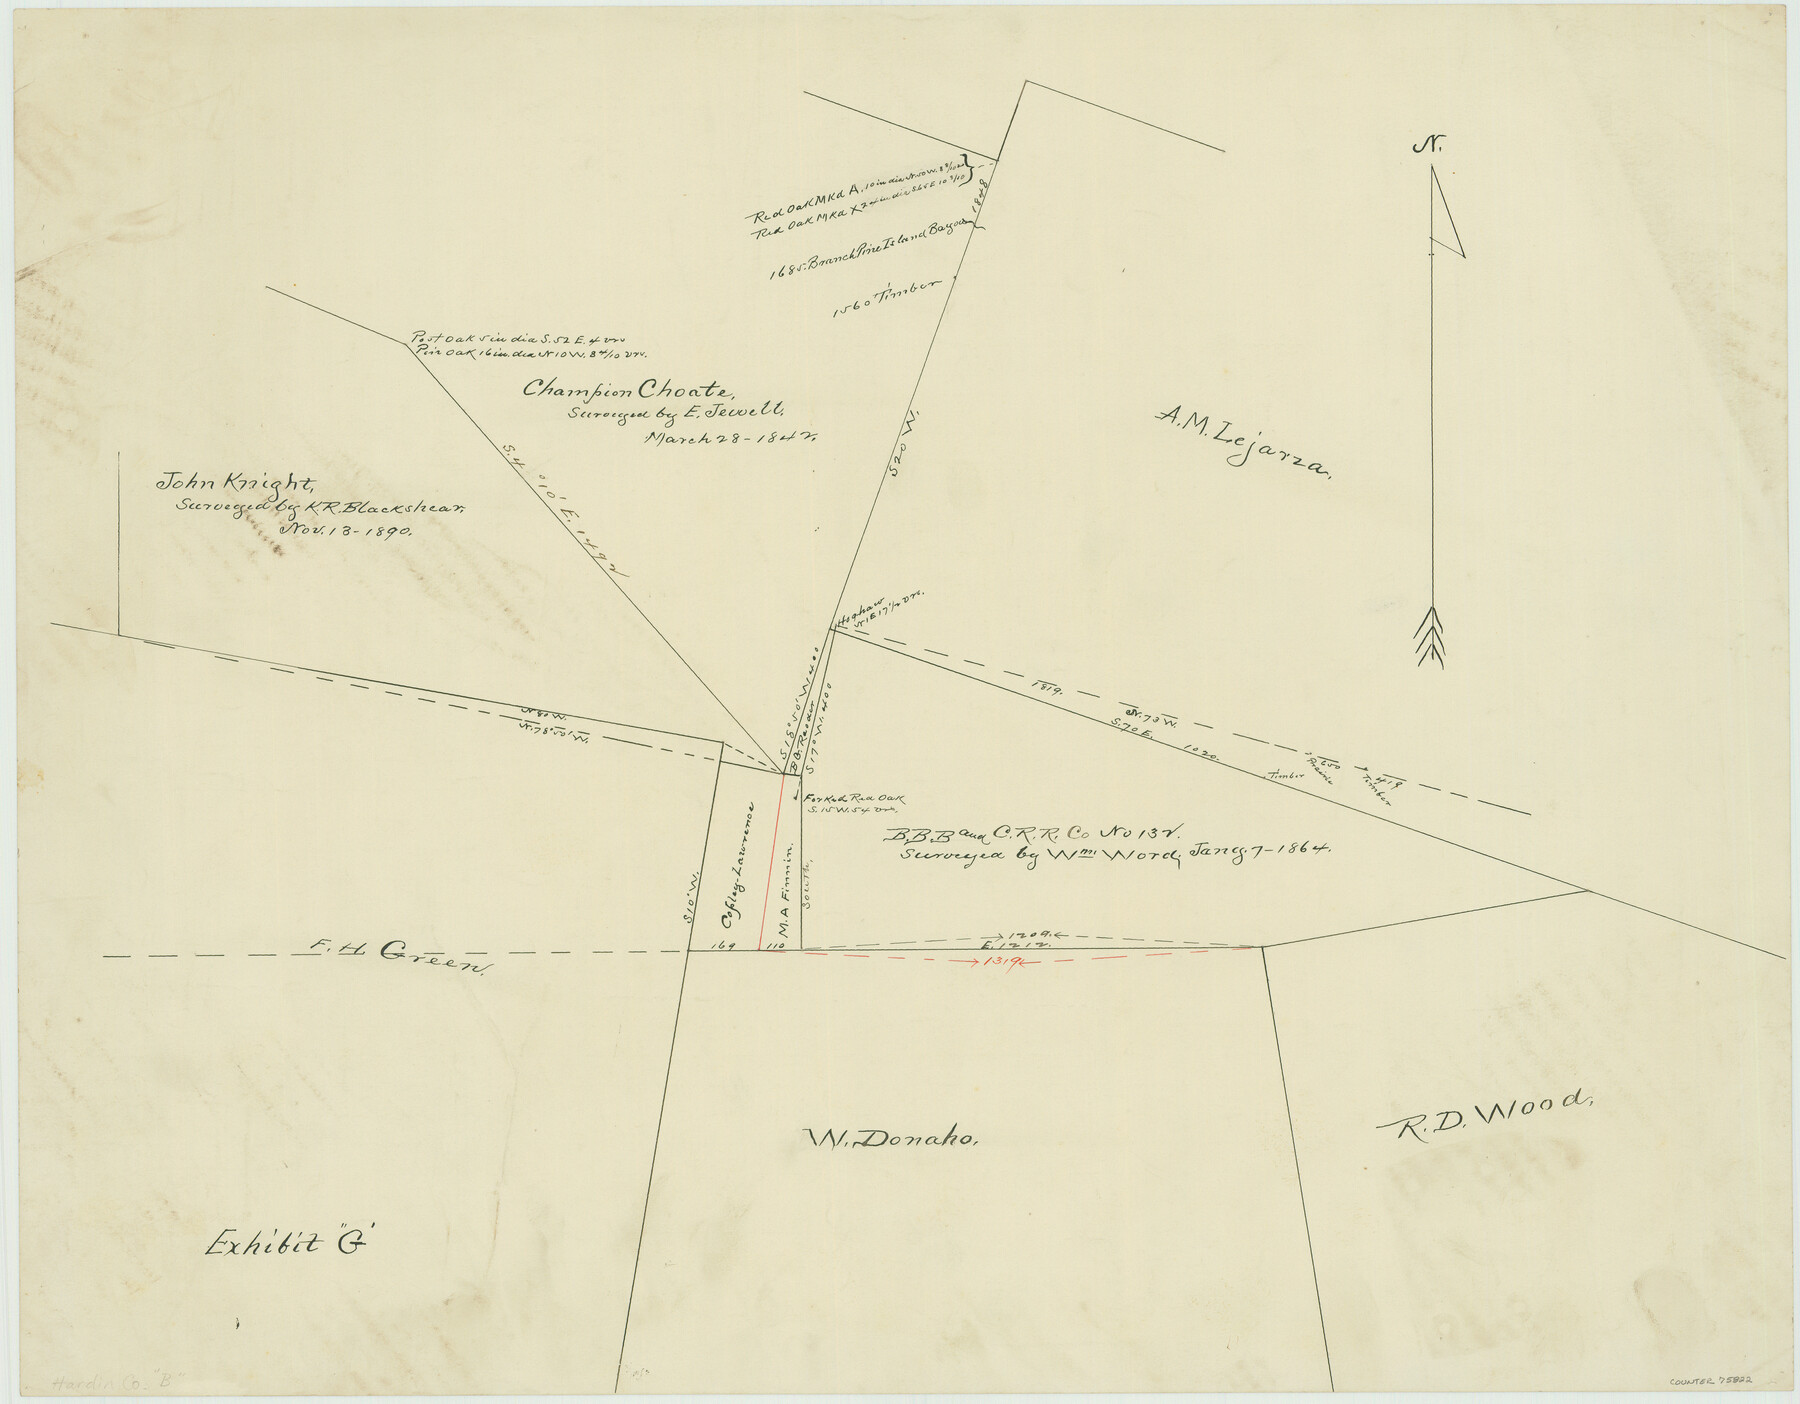 75822, [Surveying Sketch of John Knight, Champion Choate, A.M. Lejarza, et al in Hardin County, Texas - Exhibit "G"], Maddox Collection